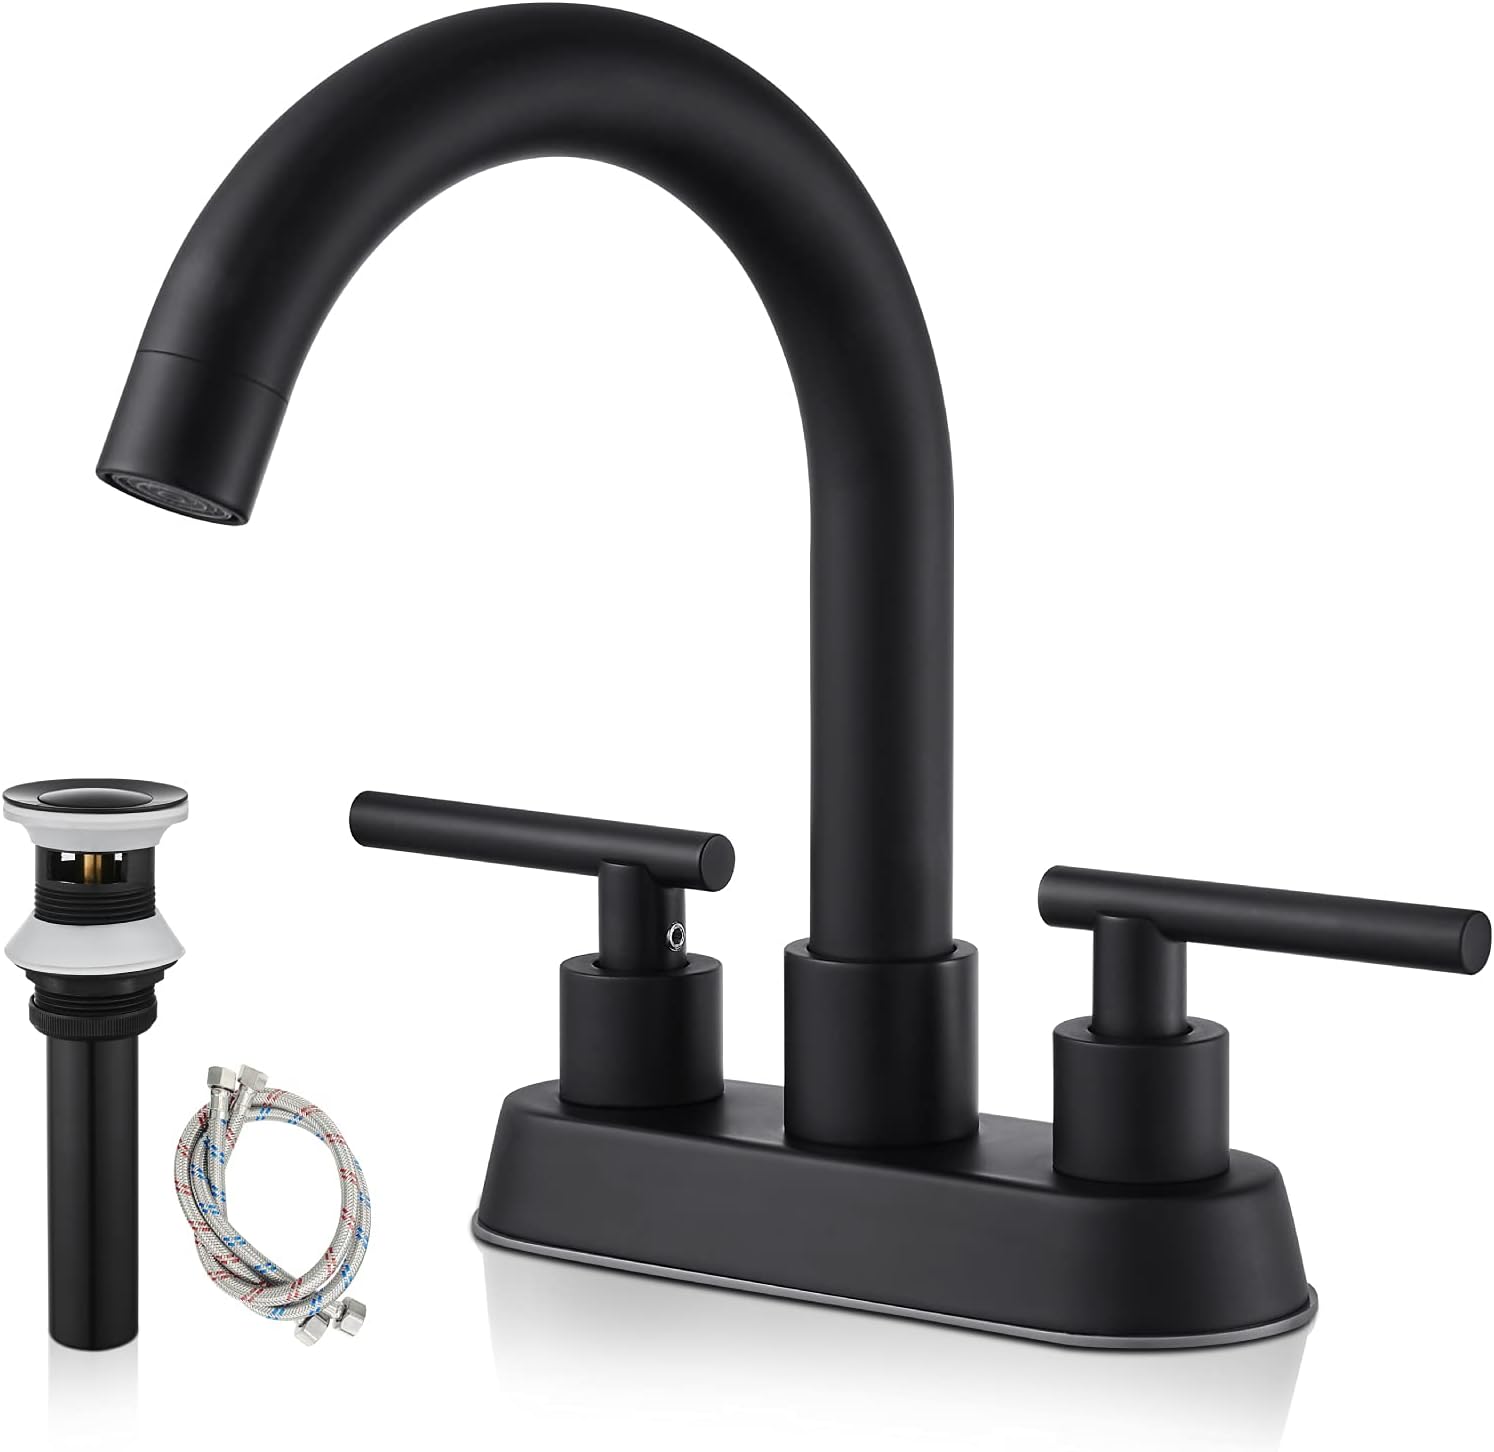 gotonovo Modern 2 Hole Bathroom Sink Faucet 4 Inch Centerset Matte Black Swivel Spout 2-Handle Deck Mounted Lavatory Faucet with Water Supply Lines and Pop Up Drain